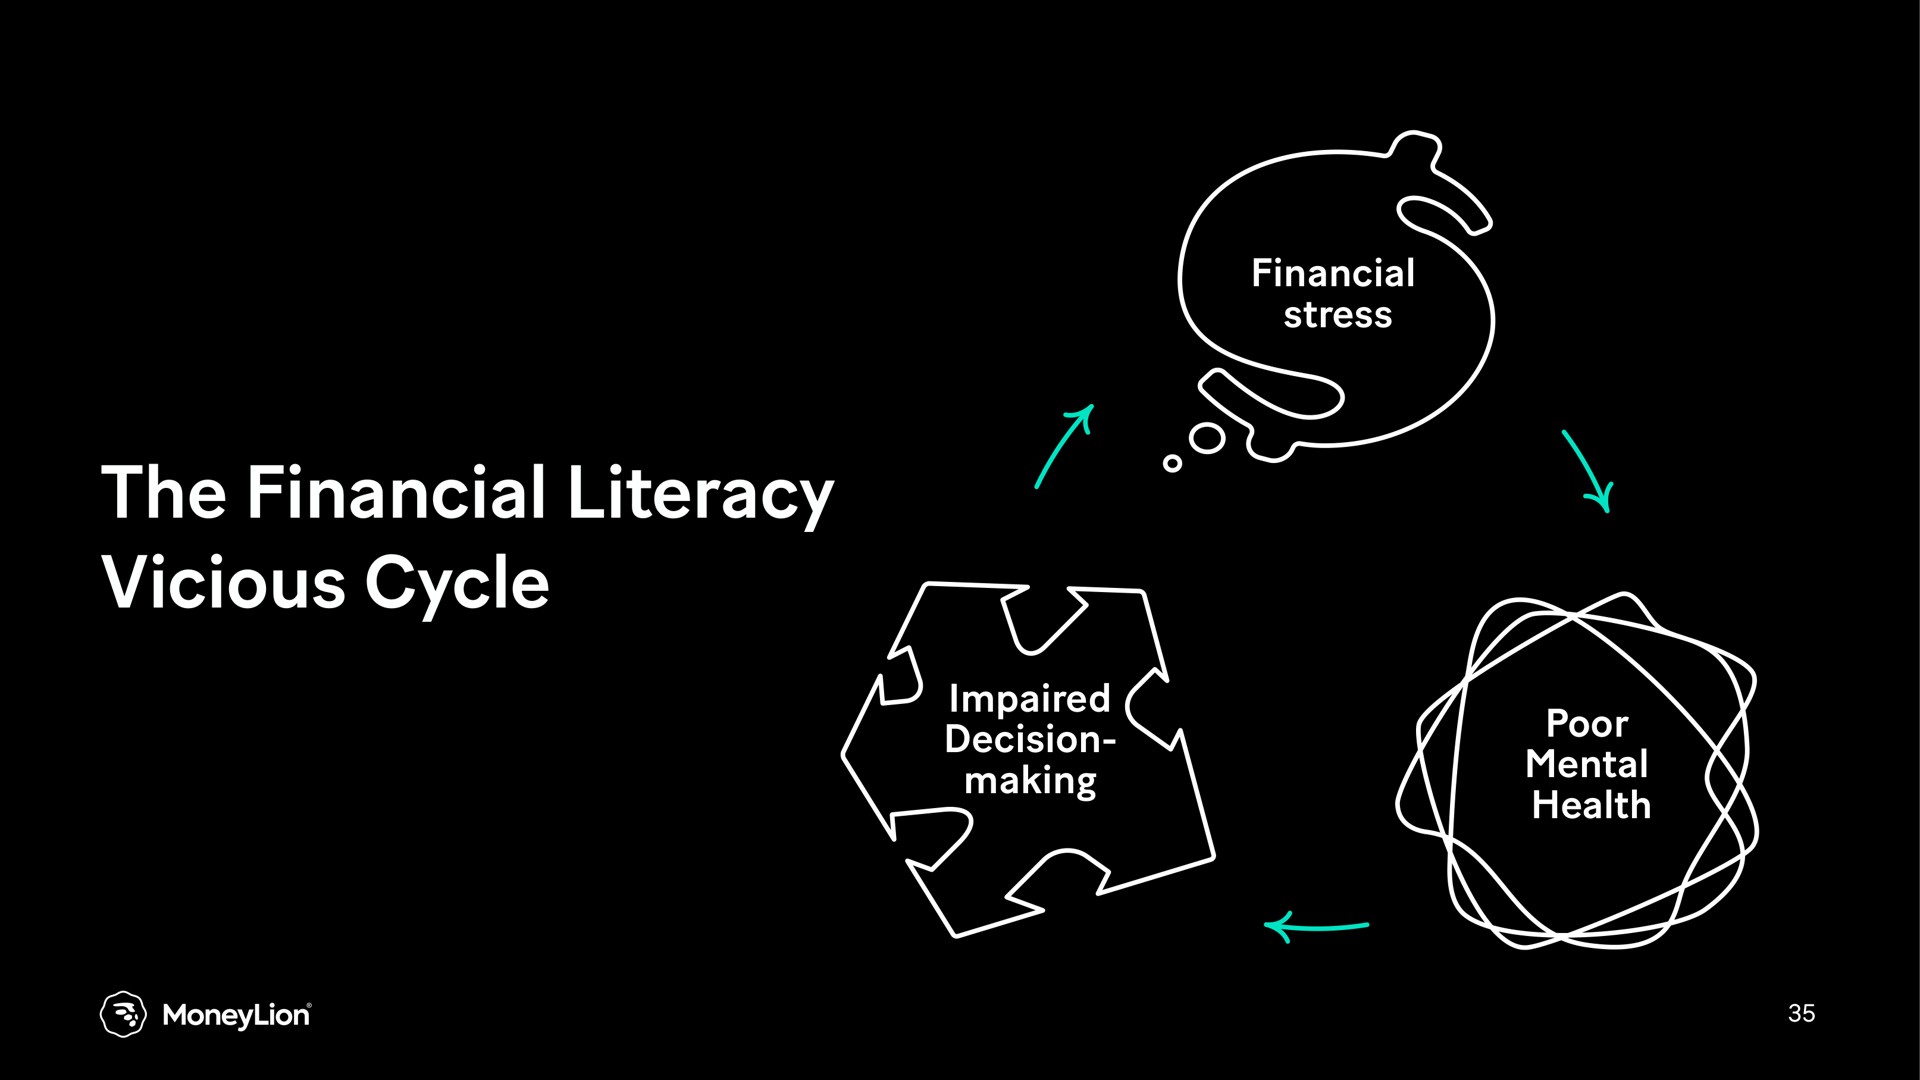 the financial literacy vicious cycle | MoneyLion